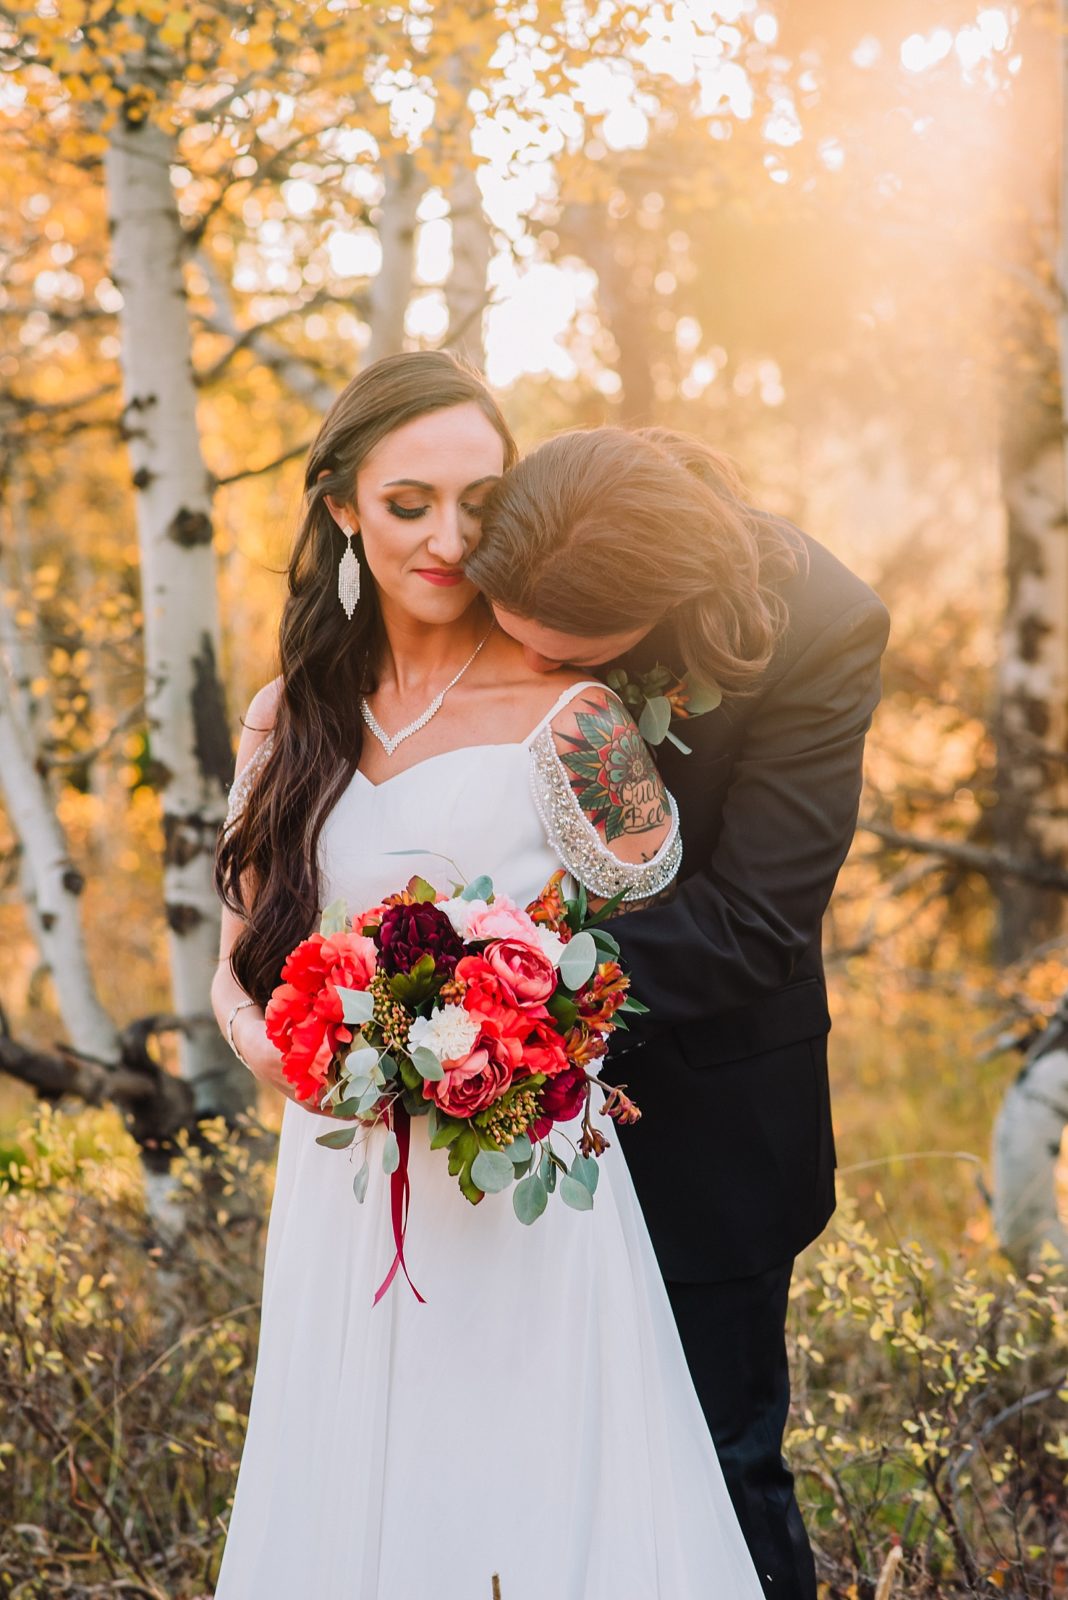 groom kissing bride's neck during fall outdoor wedding